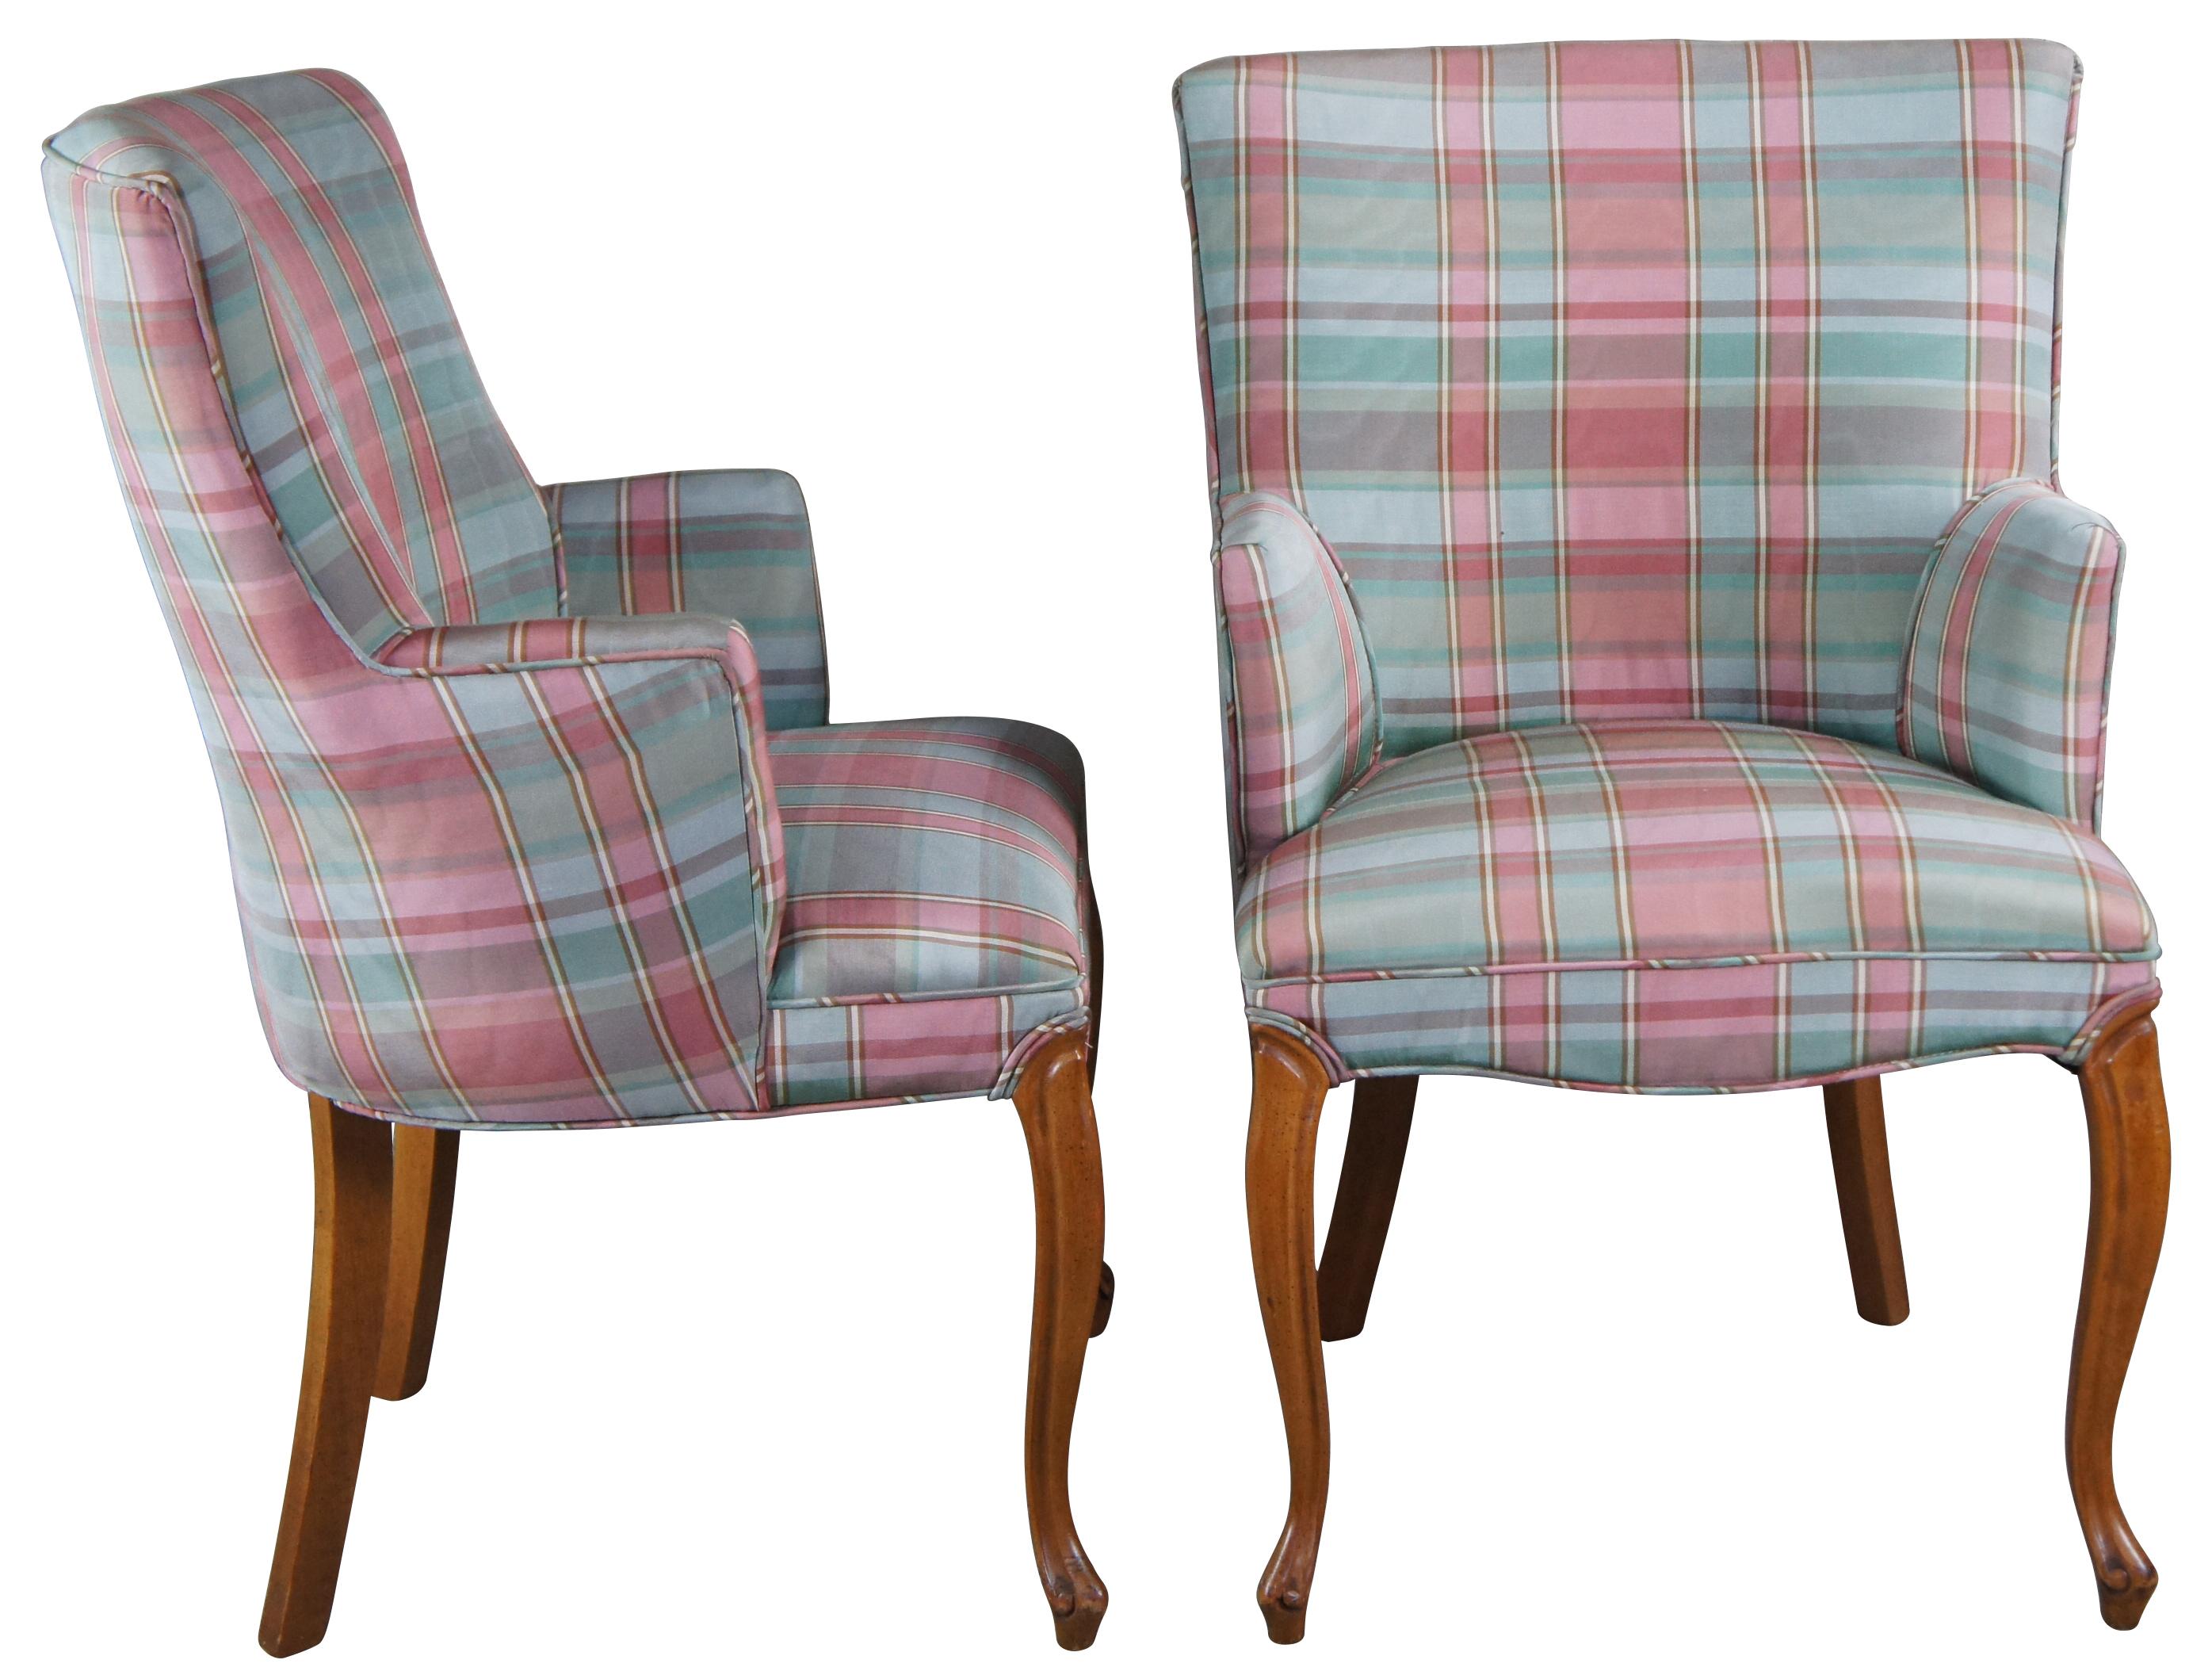 Pair of two vintage French occasional chairs featuring a flared upper back and half arm with pink and green silk plaid upholstery and serpenine leg with cabriole feet. Circa third quarter of 20th century.
 